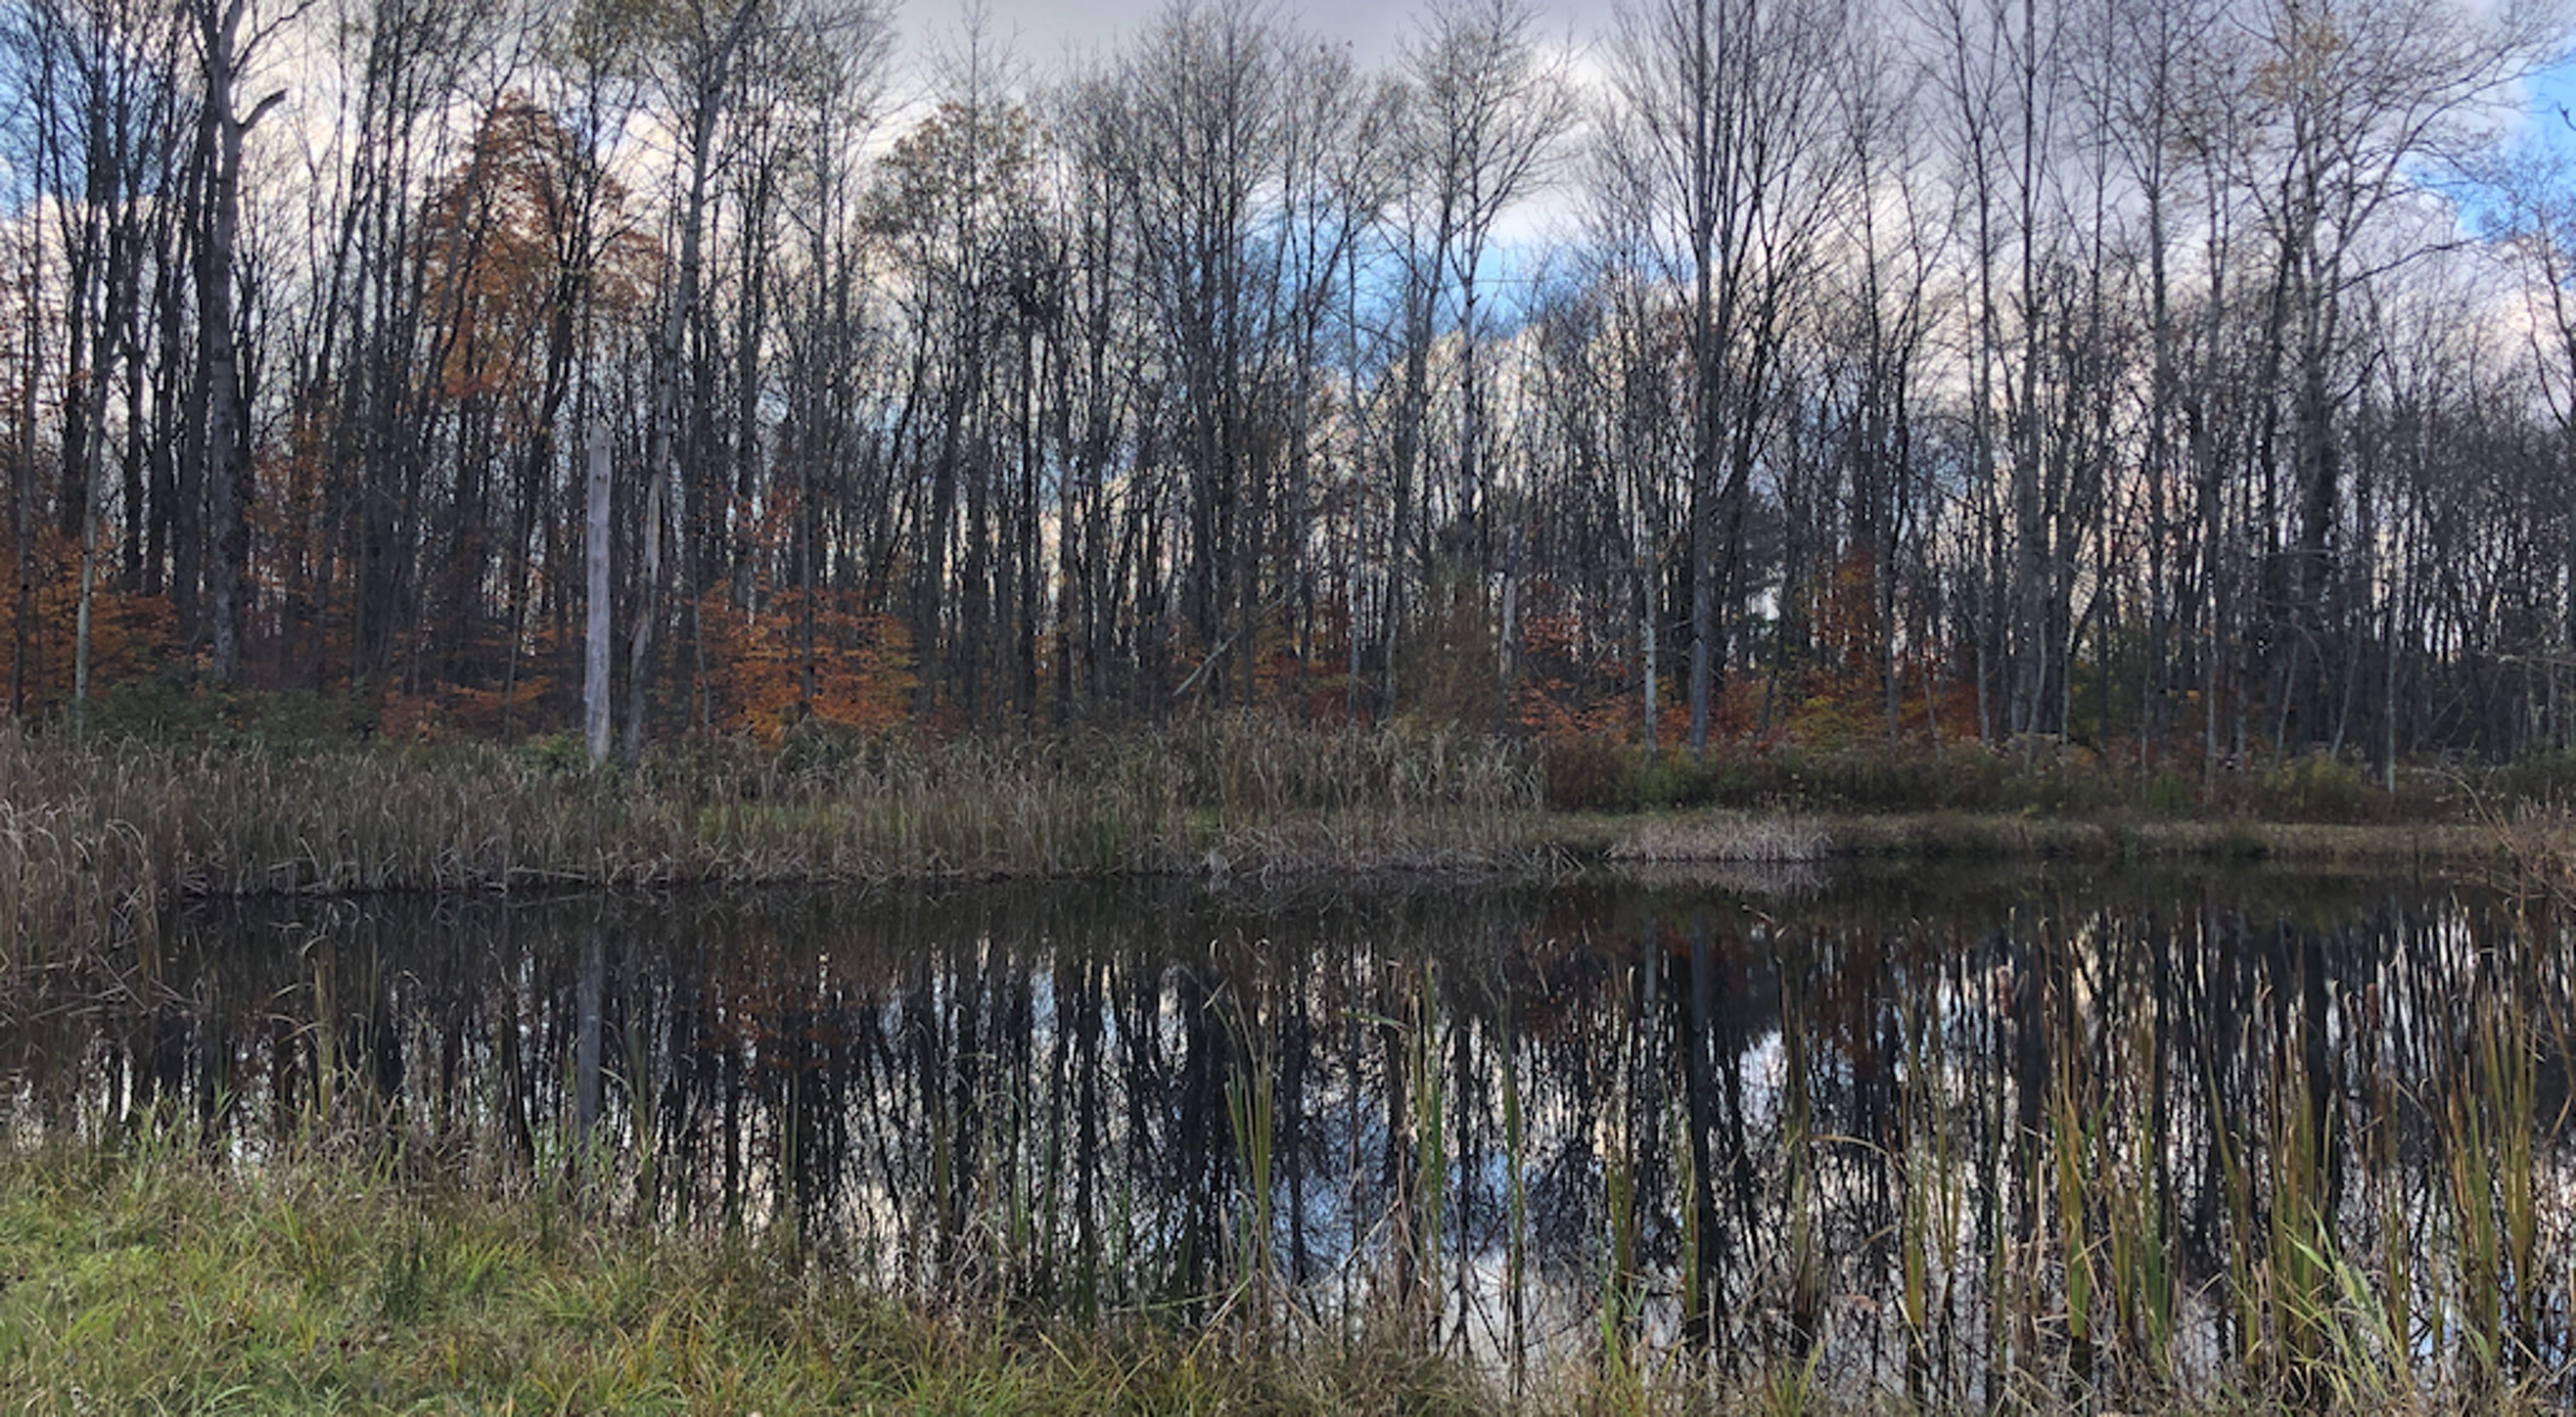 Landscape photo of Fillmore Nature Preserve, showing trees and a lake.